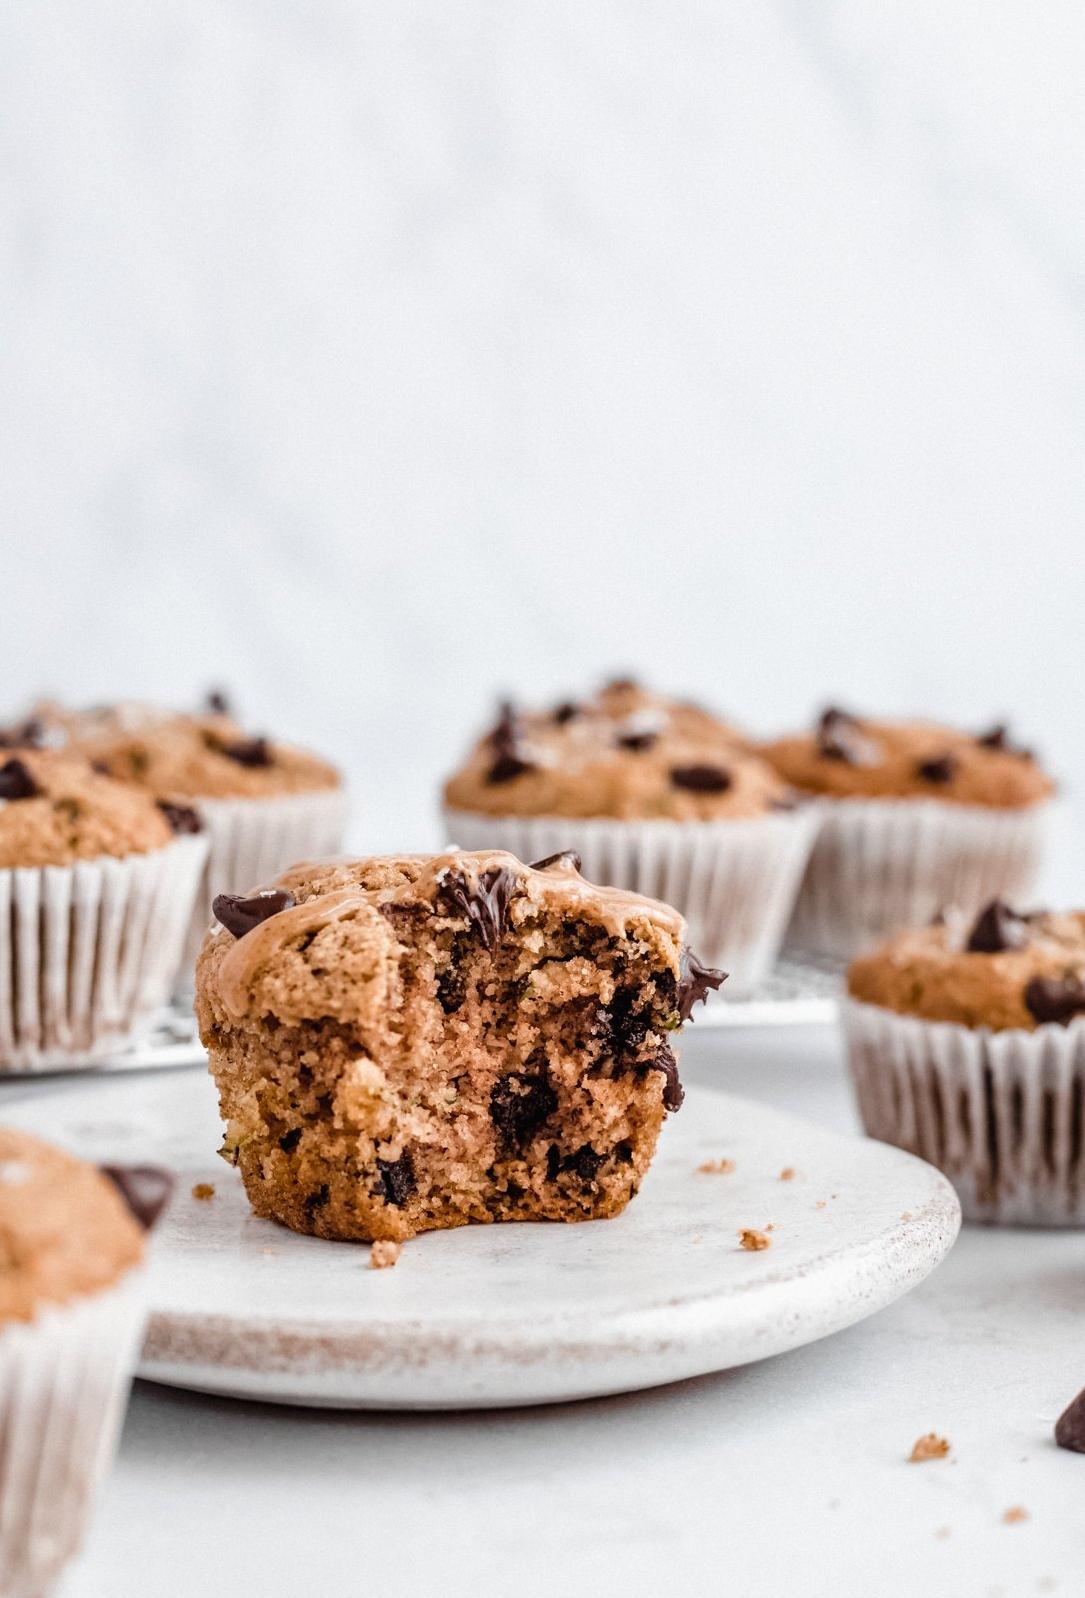  Who says muffins can't be healthy? These zucchini chocolate chip mini-muffins are gluten-free, dairy-free, and organic.